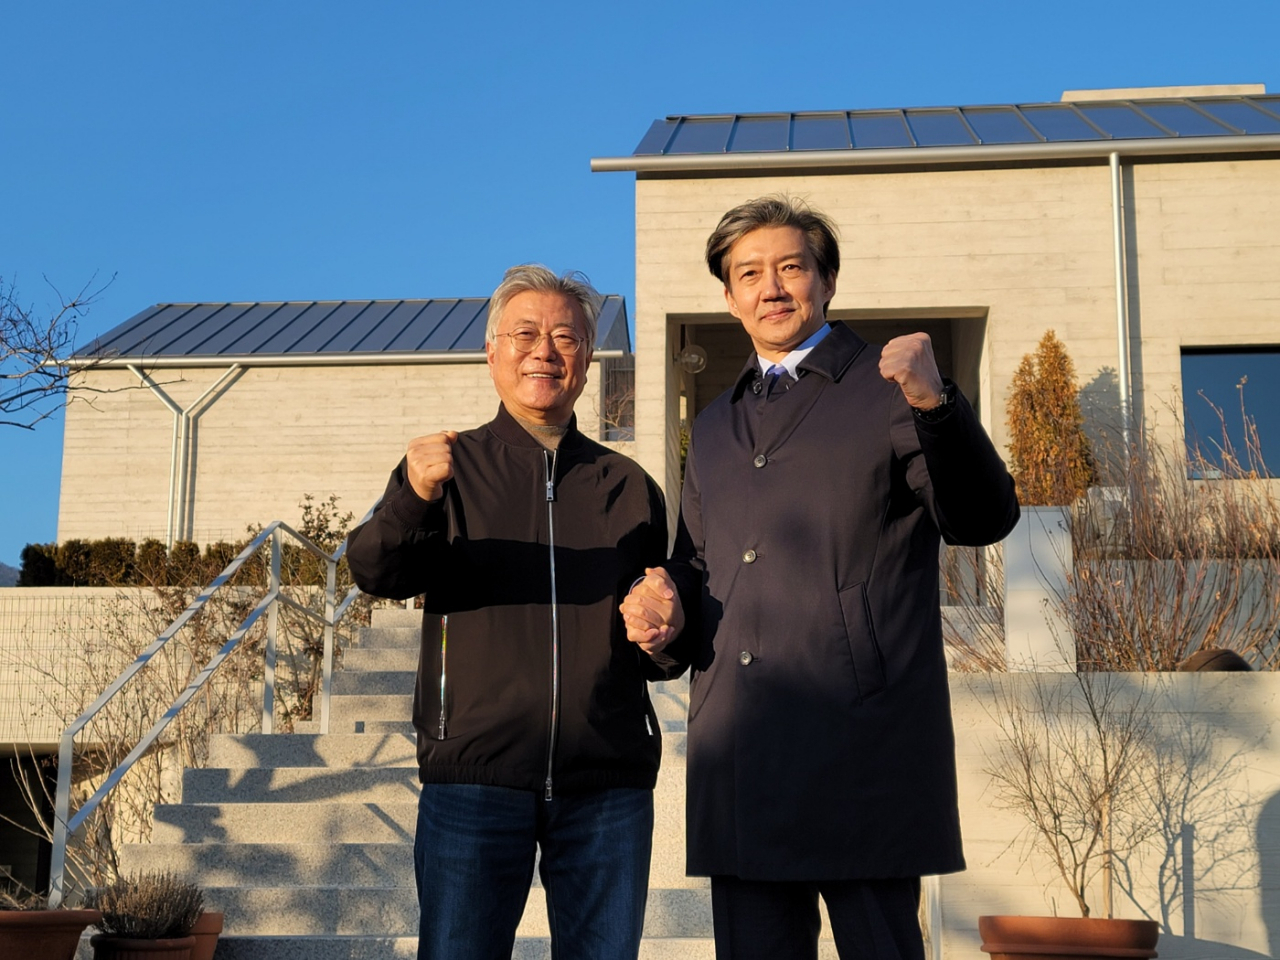 Ex-Justice Minister Cho Kuk, right, poses for a photo next to former President Moon Jae-in near Moon's residence in a rural village in Pyeongsan-gun, South Gyeongsang Province on Monday. (Yonhap)